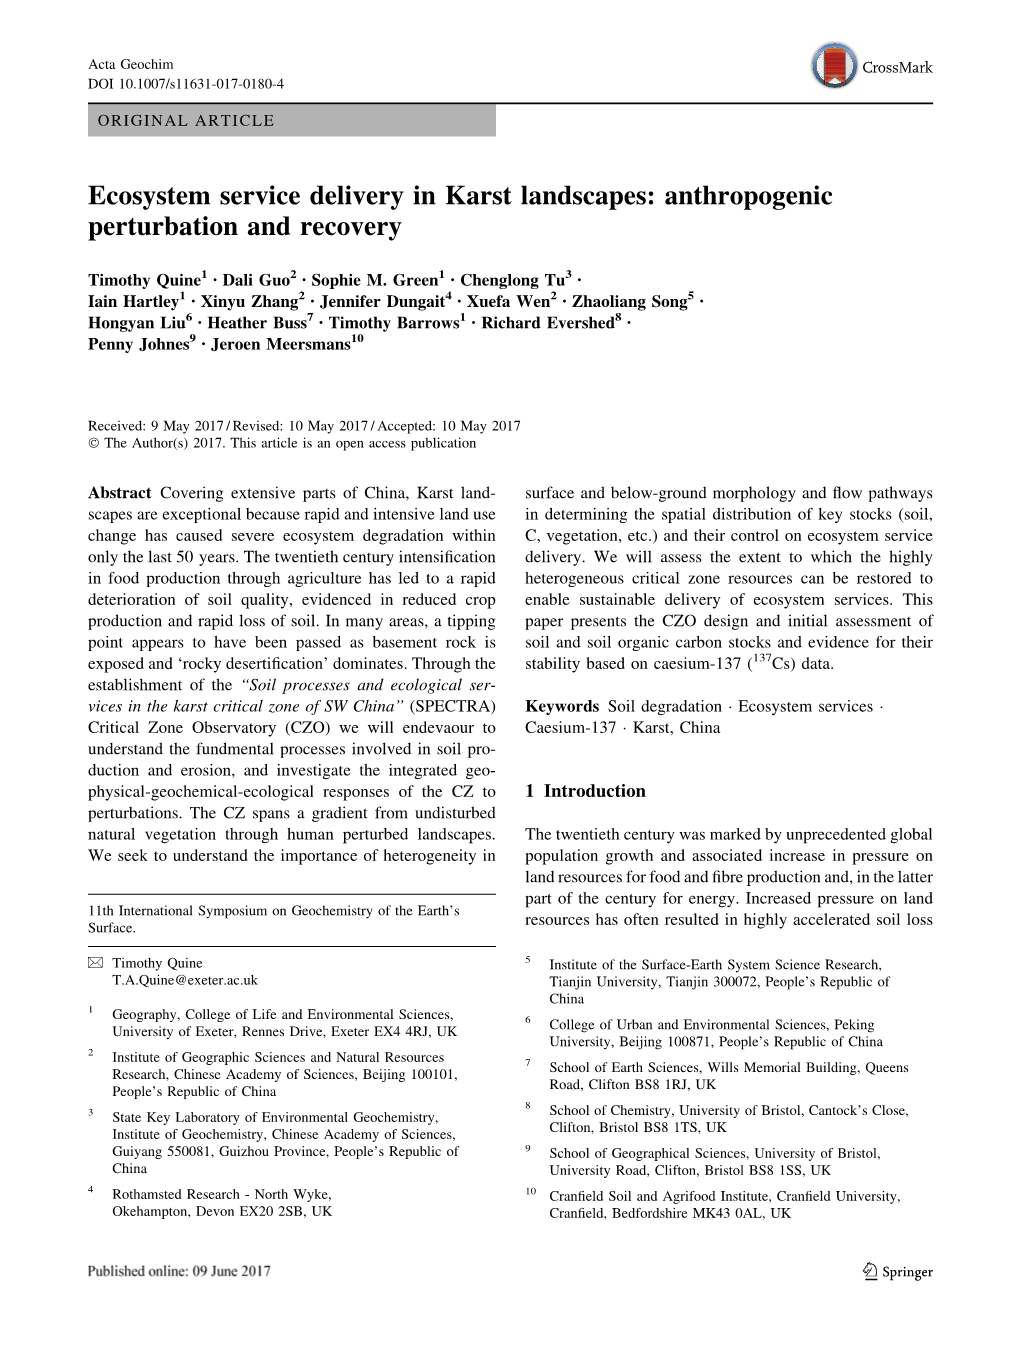 Ecosystem Service Delivery in Karst Landscapes: Anthropogenic Perturbation and Recovery